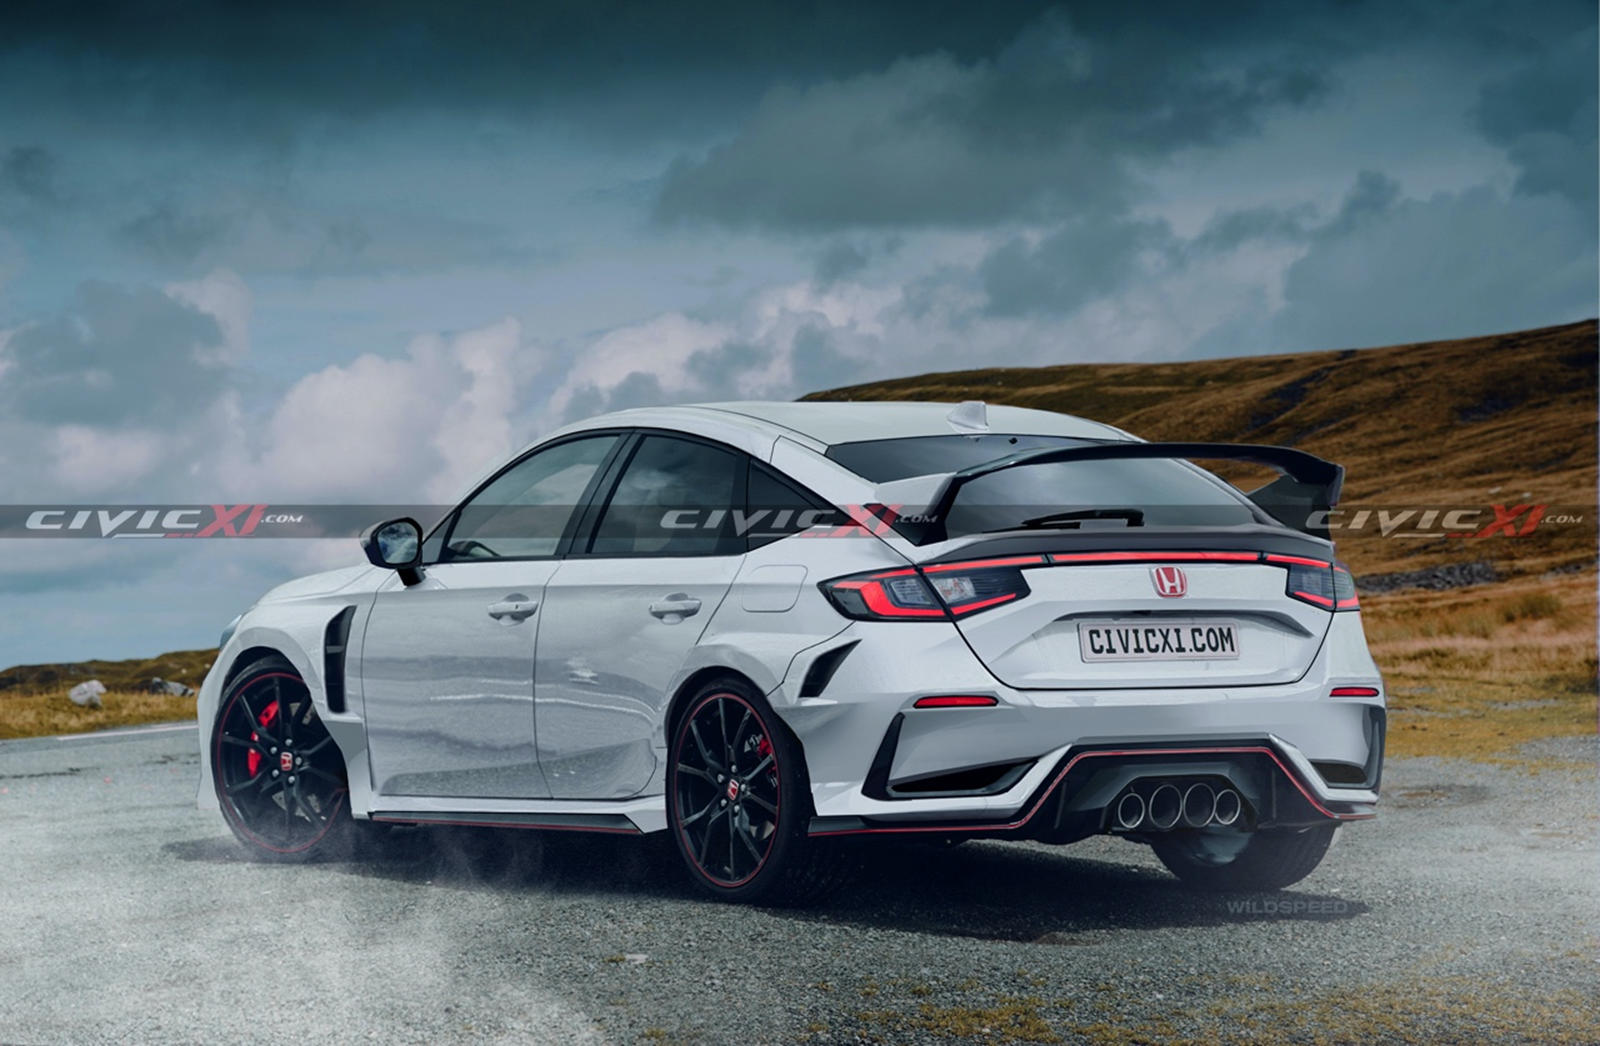 The Next Generation Honda Civic Type R Should Look Awesome Carbuzz